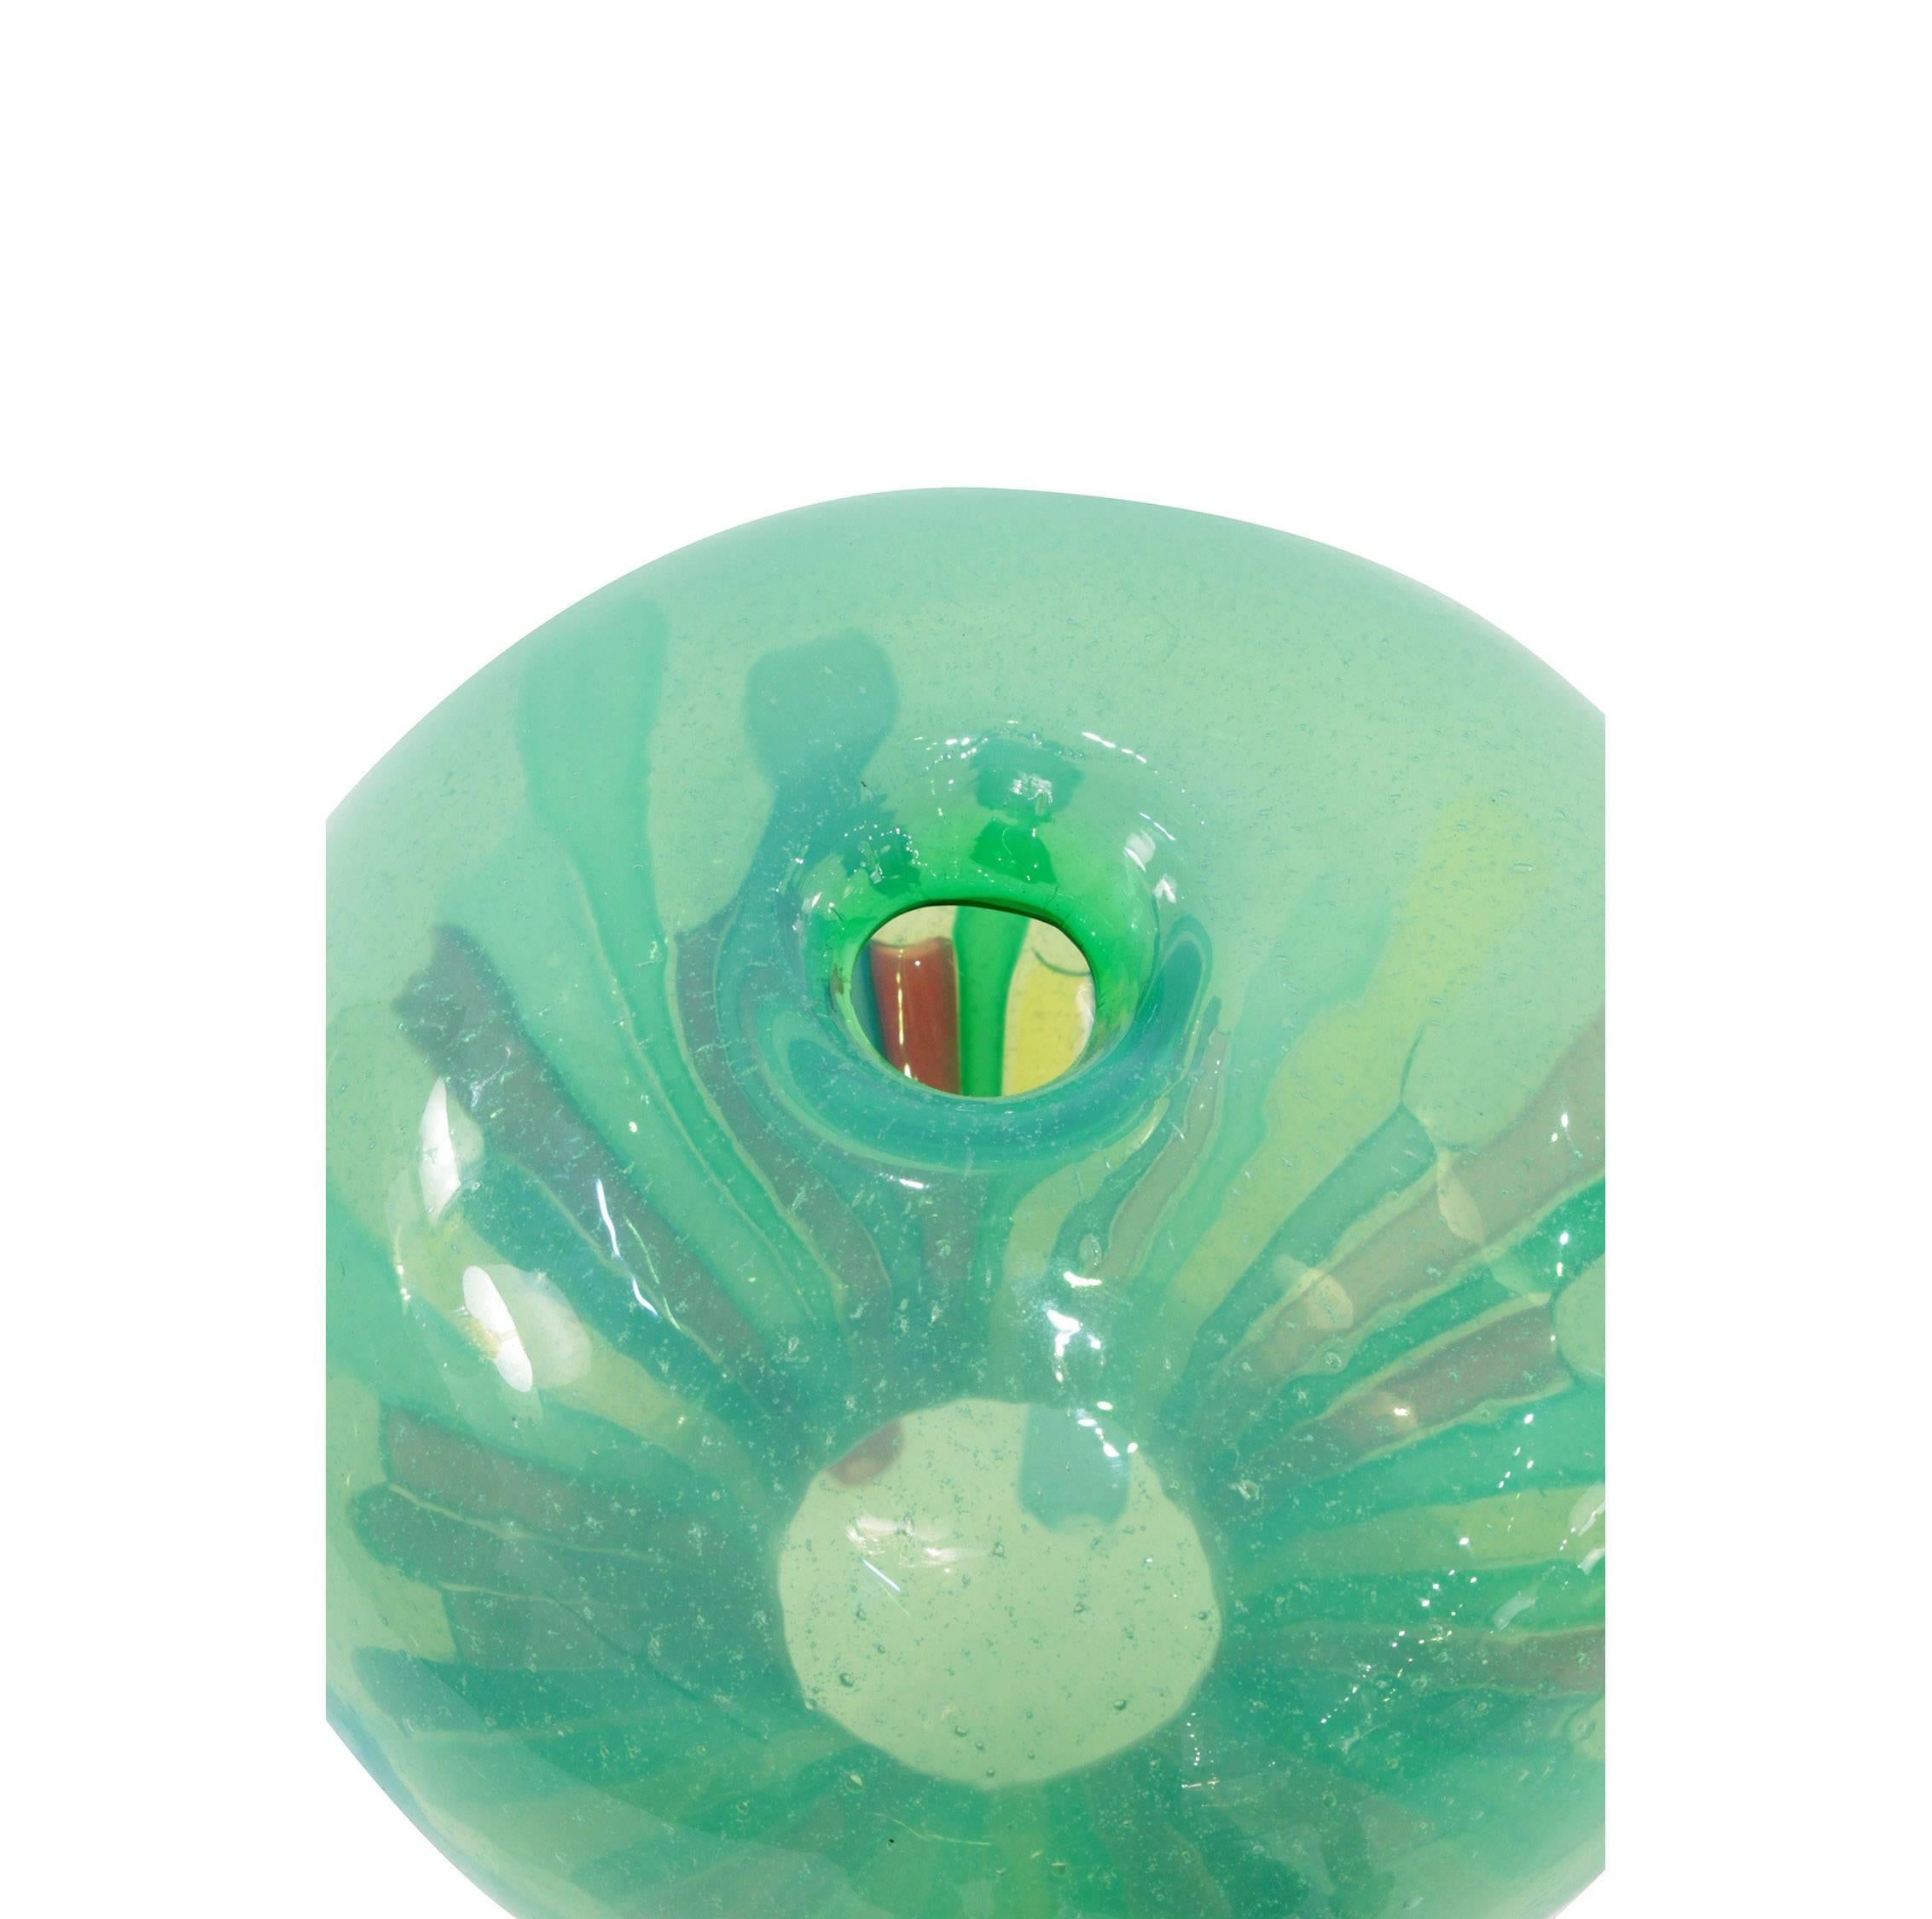 Large handblown green hourglass vase with applied multi-color rods designed by Anzolo Fuga for A.VE.M. (Arte Vetraria Muranese), Murano, Italy, circa 1960.

Rosa Barovier-Mentasti, Anzolo Fuga, Murano glass artist, Acanthus Press 2005, a general